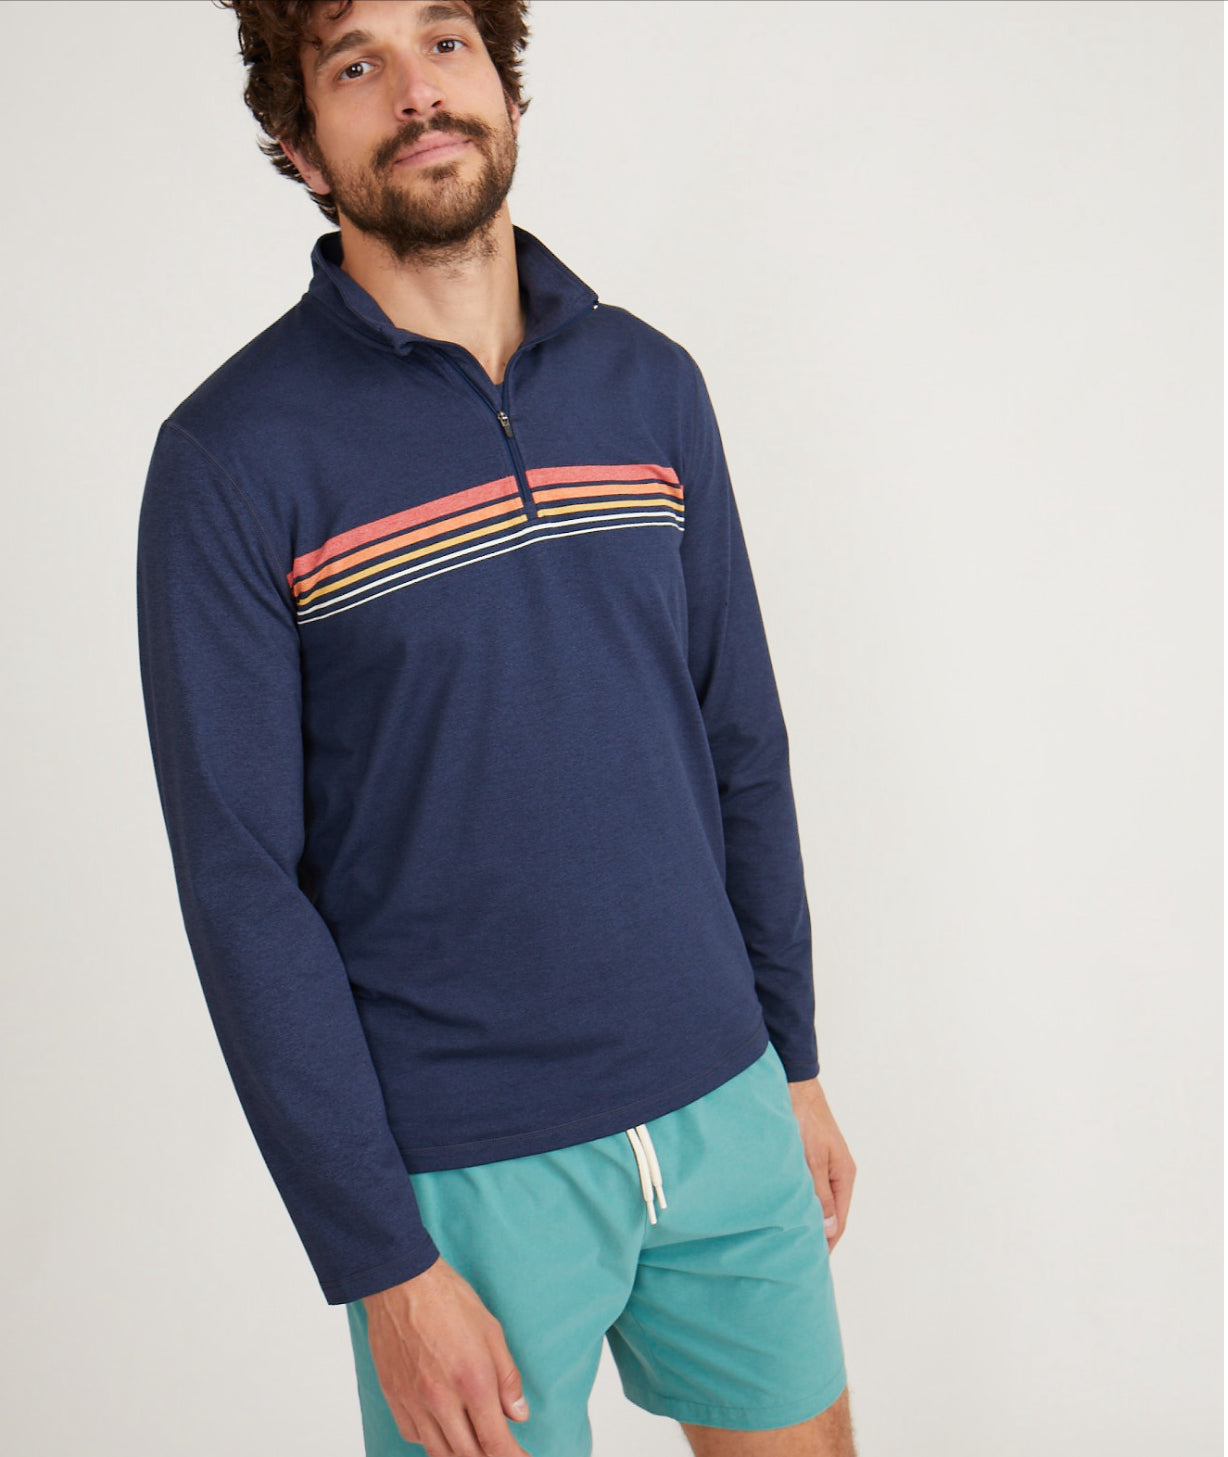 Recycled quarter zip with warm colored chest stripe - Tru Blue Boutique